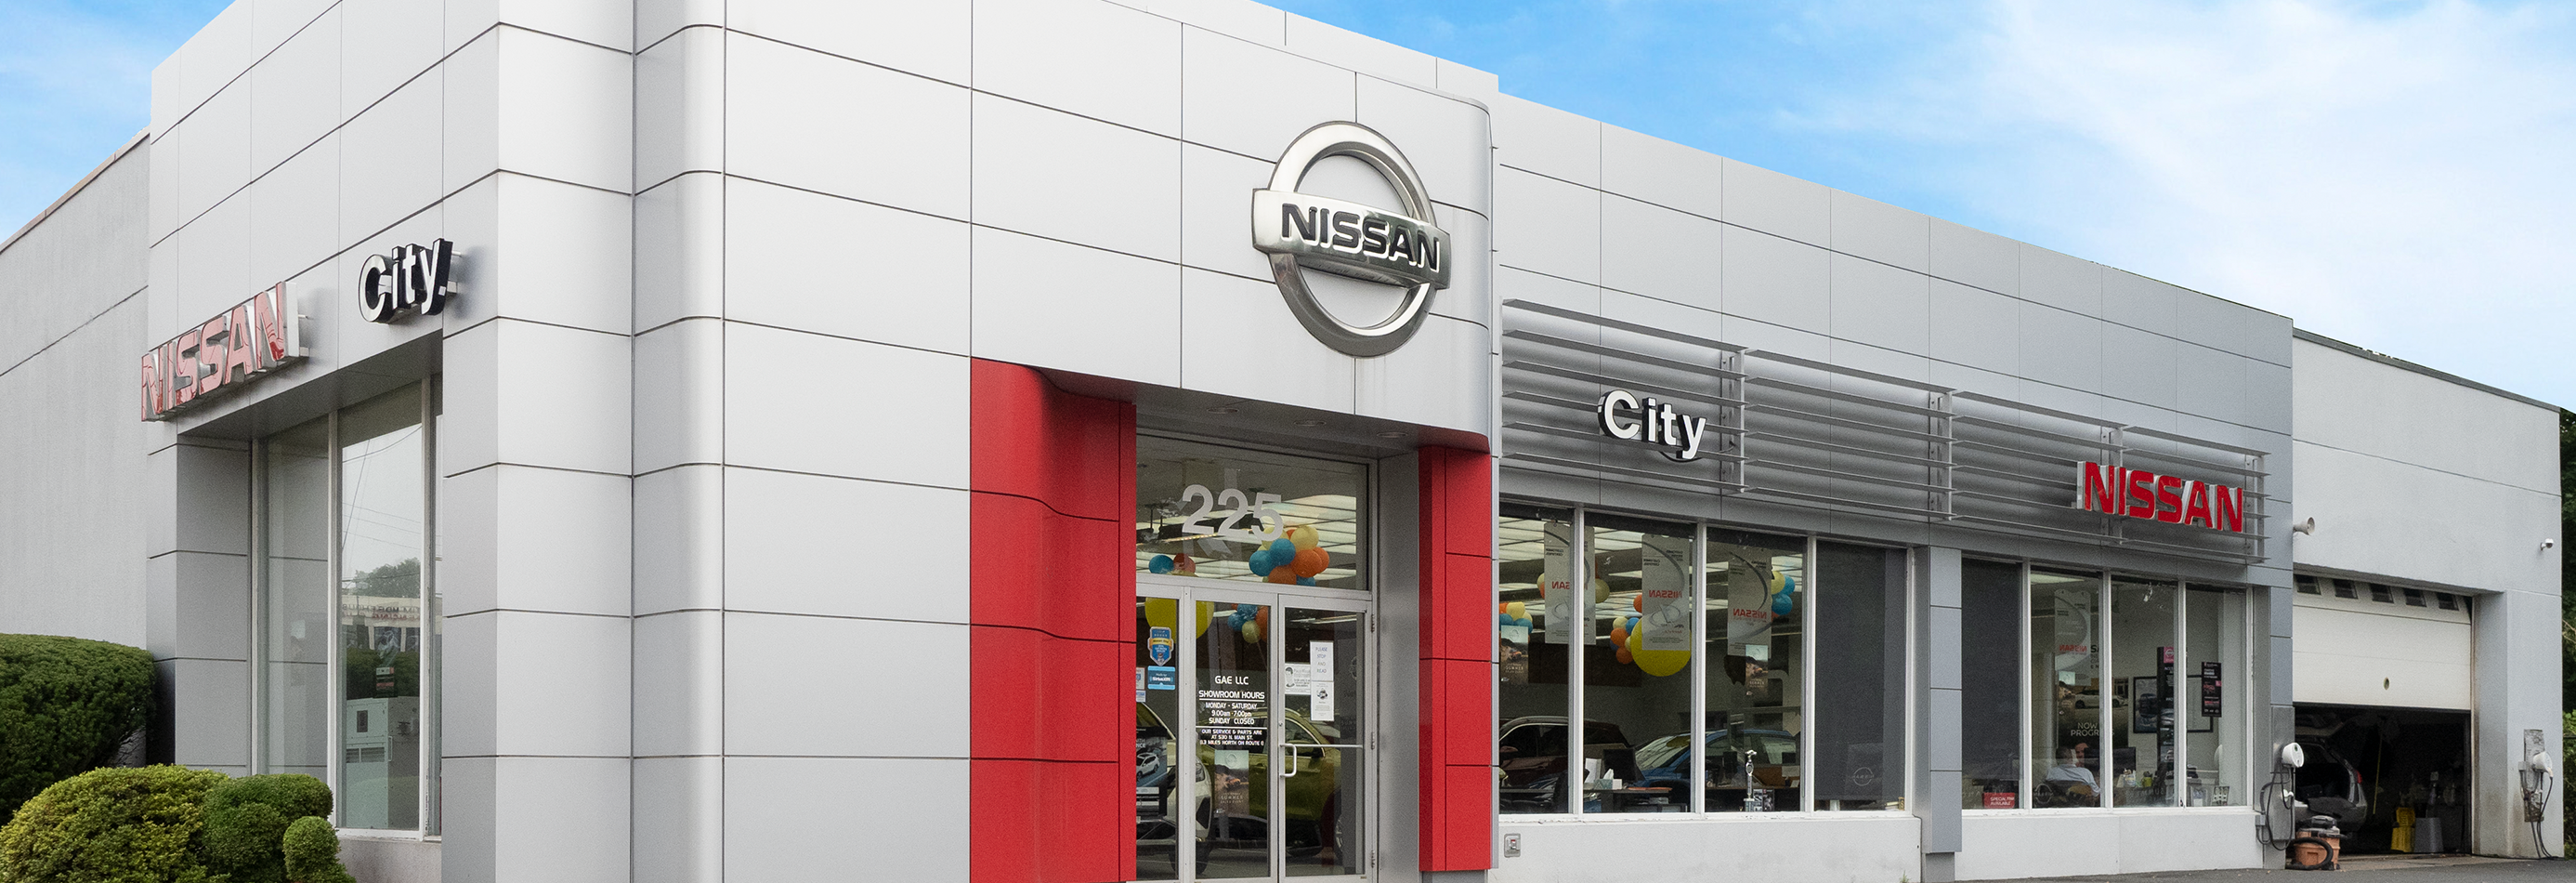 Nissan City serving Elmsford NY